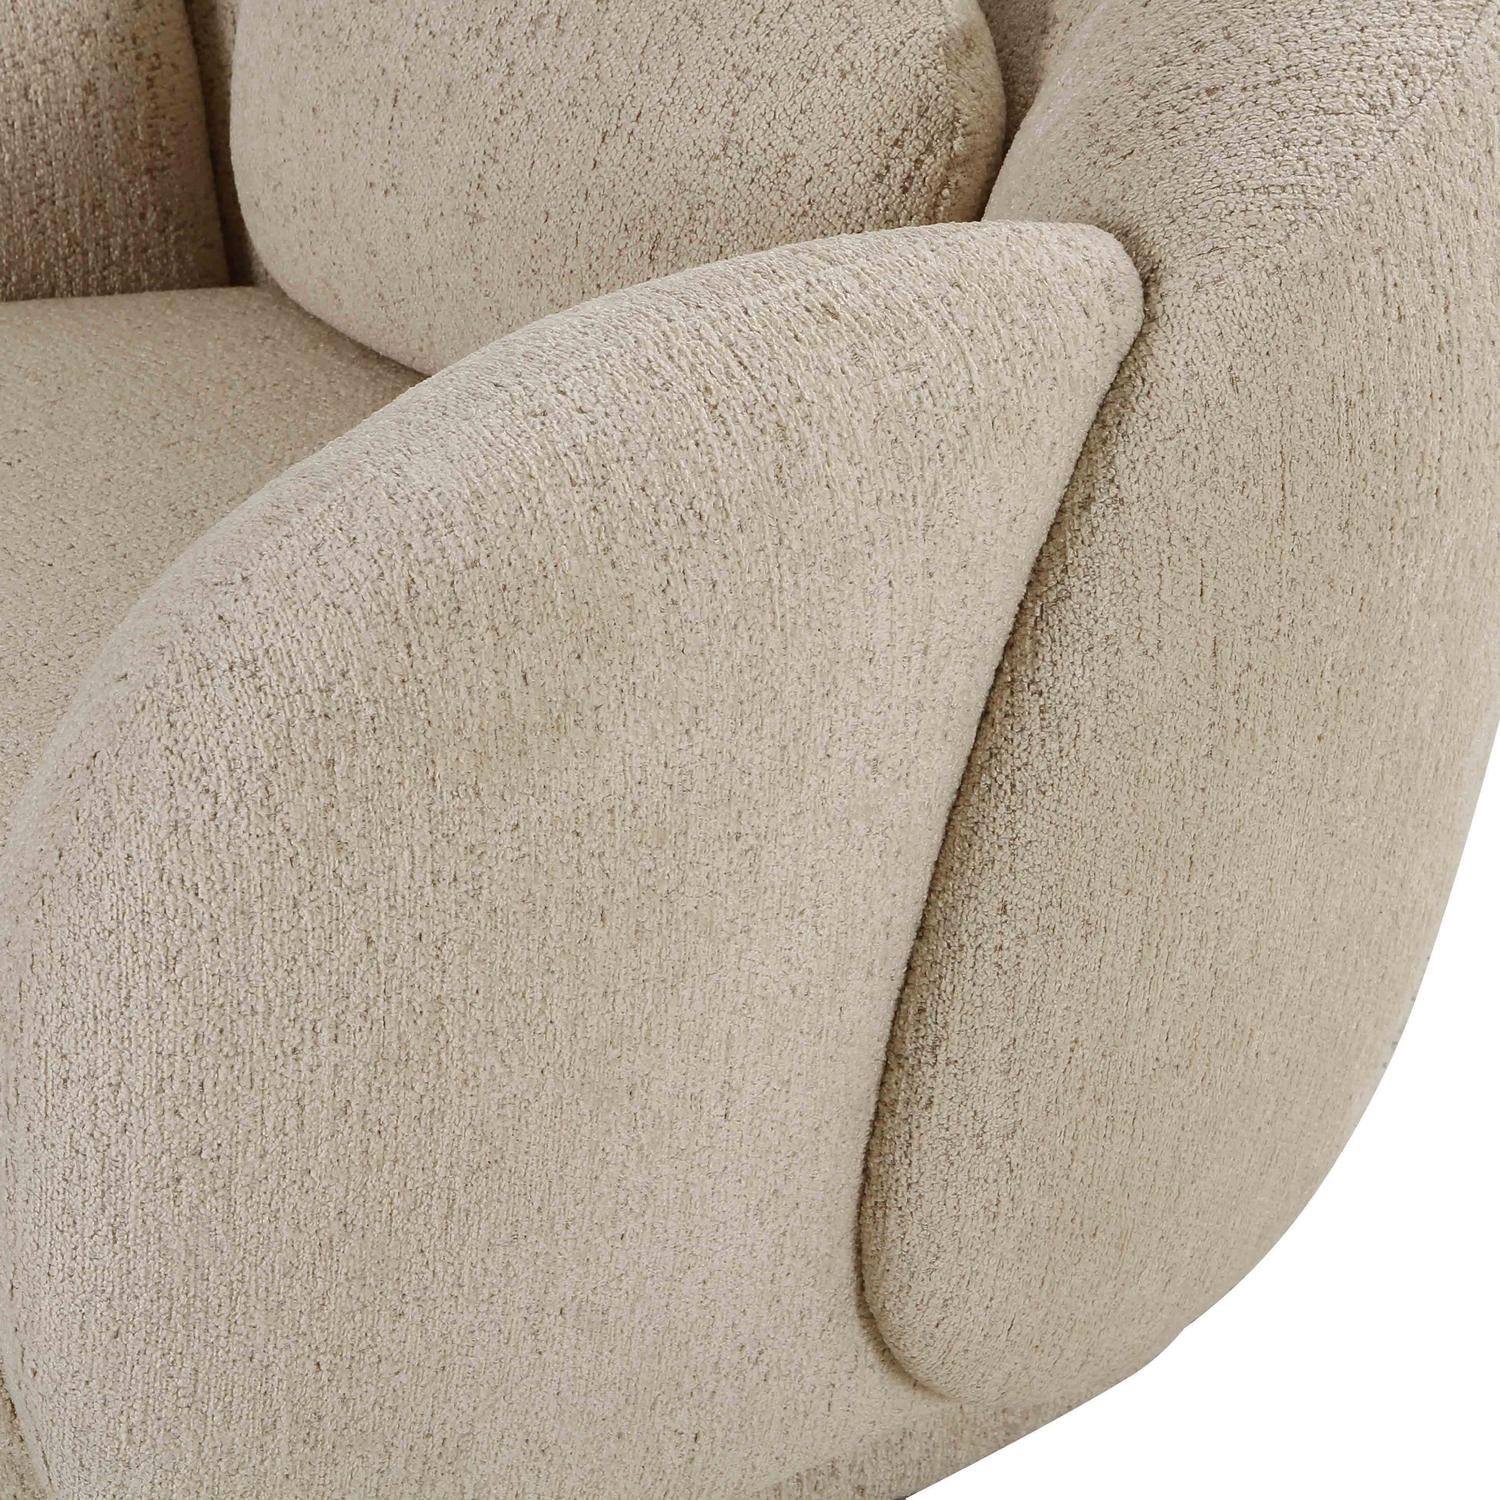 bedroom wingback chair Tov Furniture Accent Chairs Cream